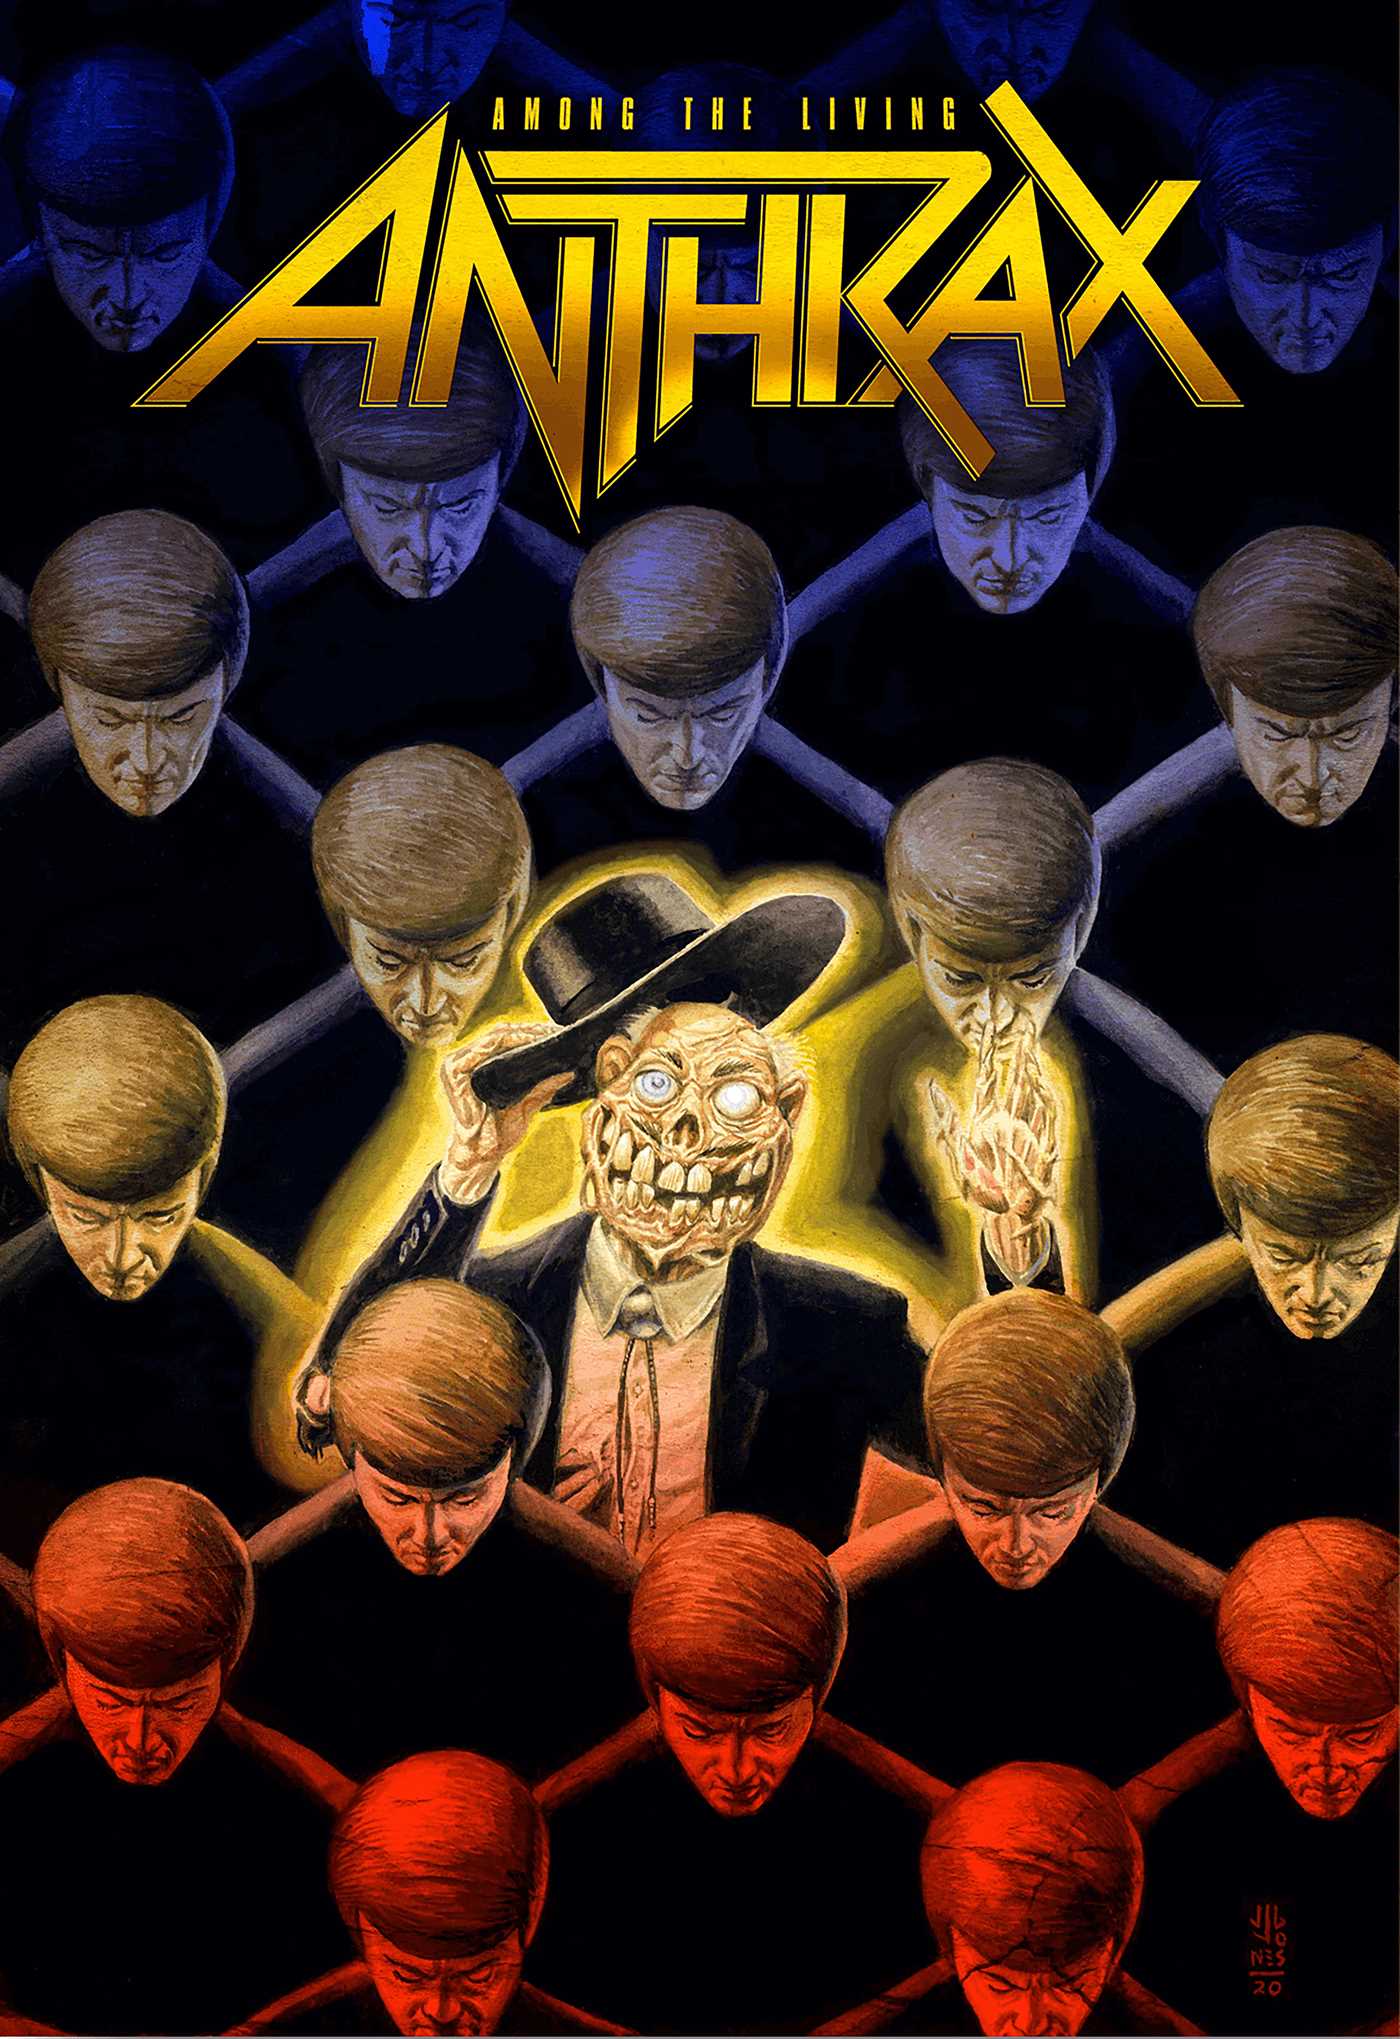 Picture of Anthrax: Among The Living